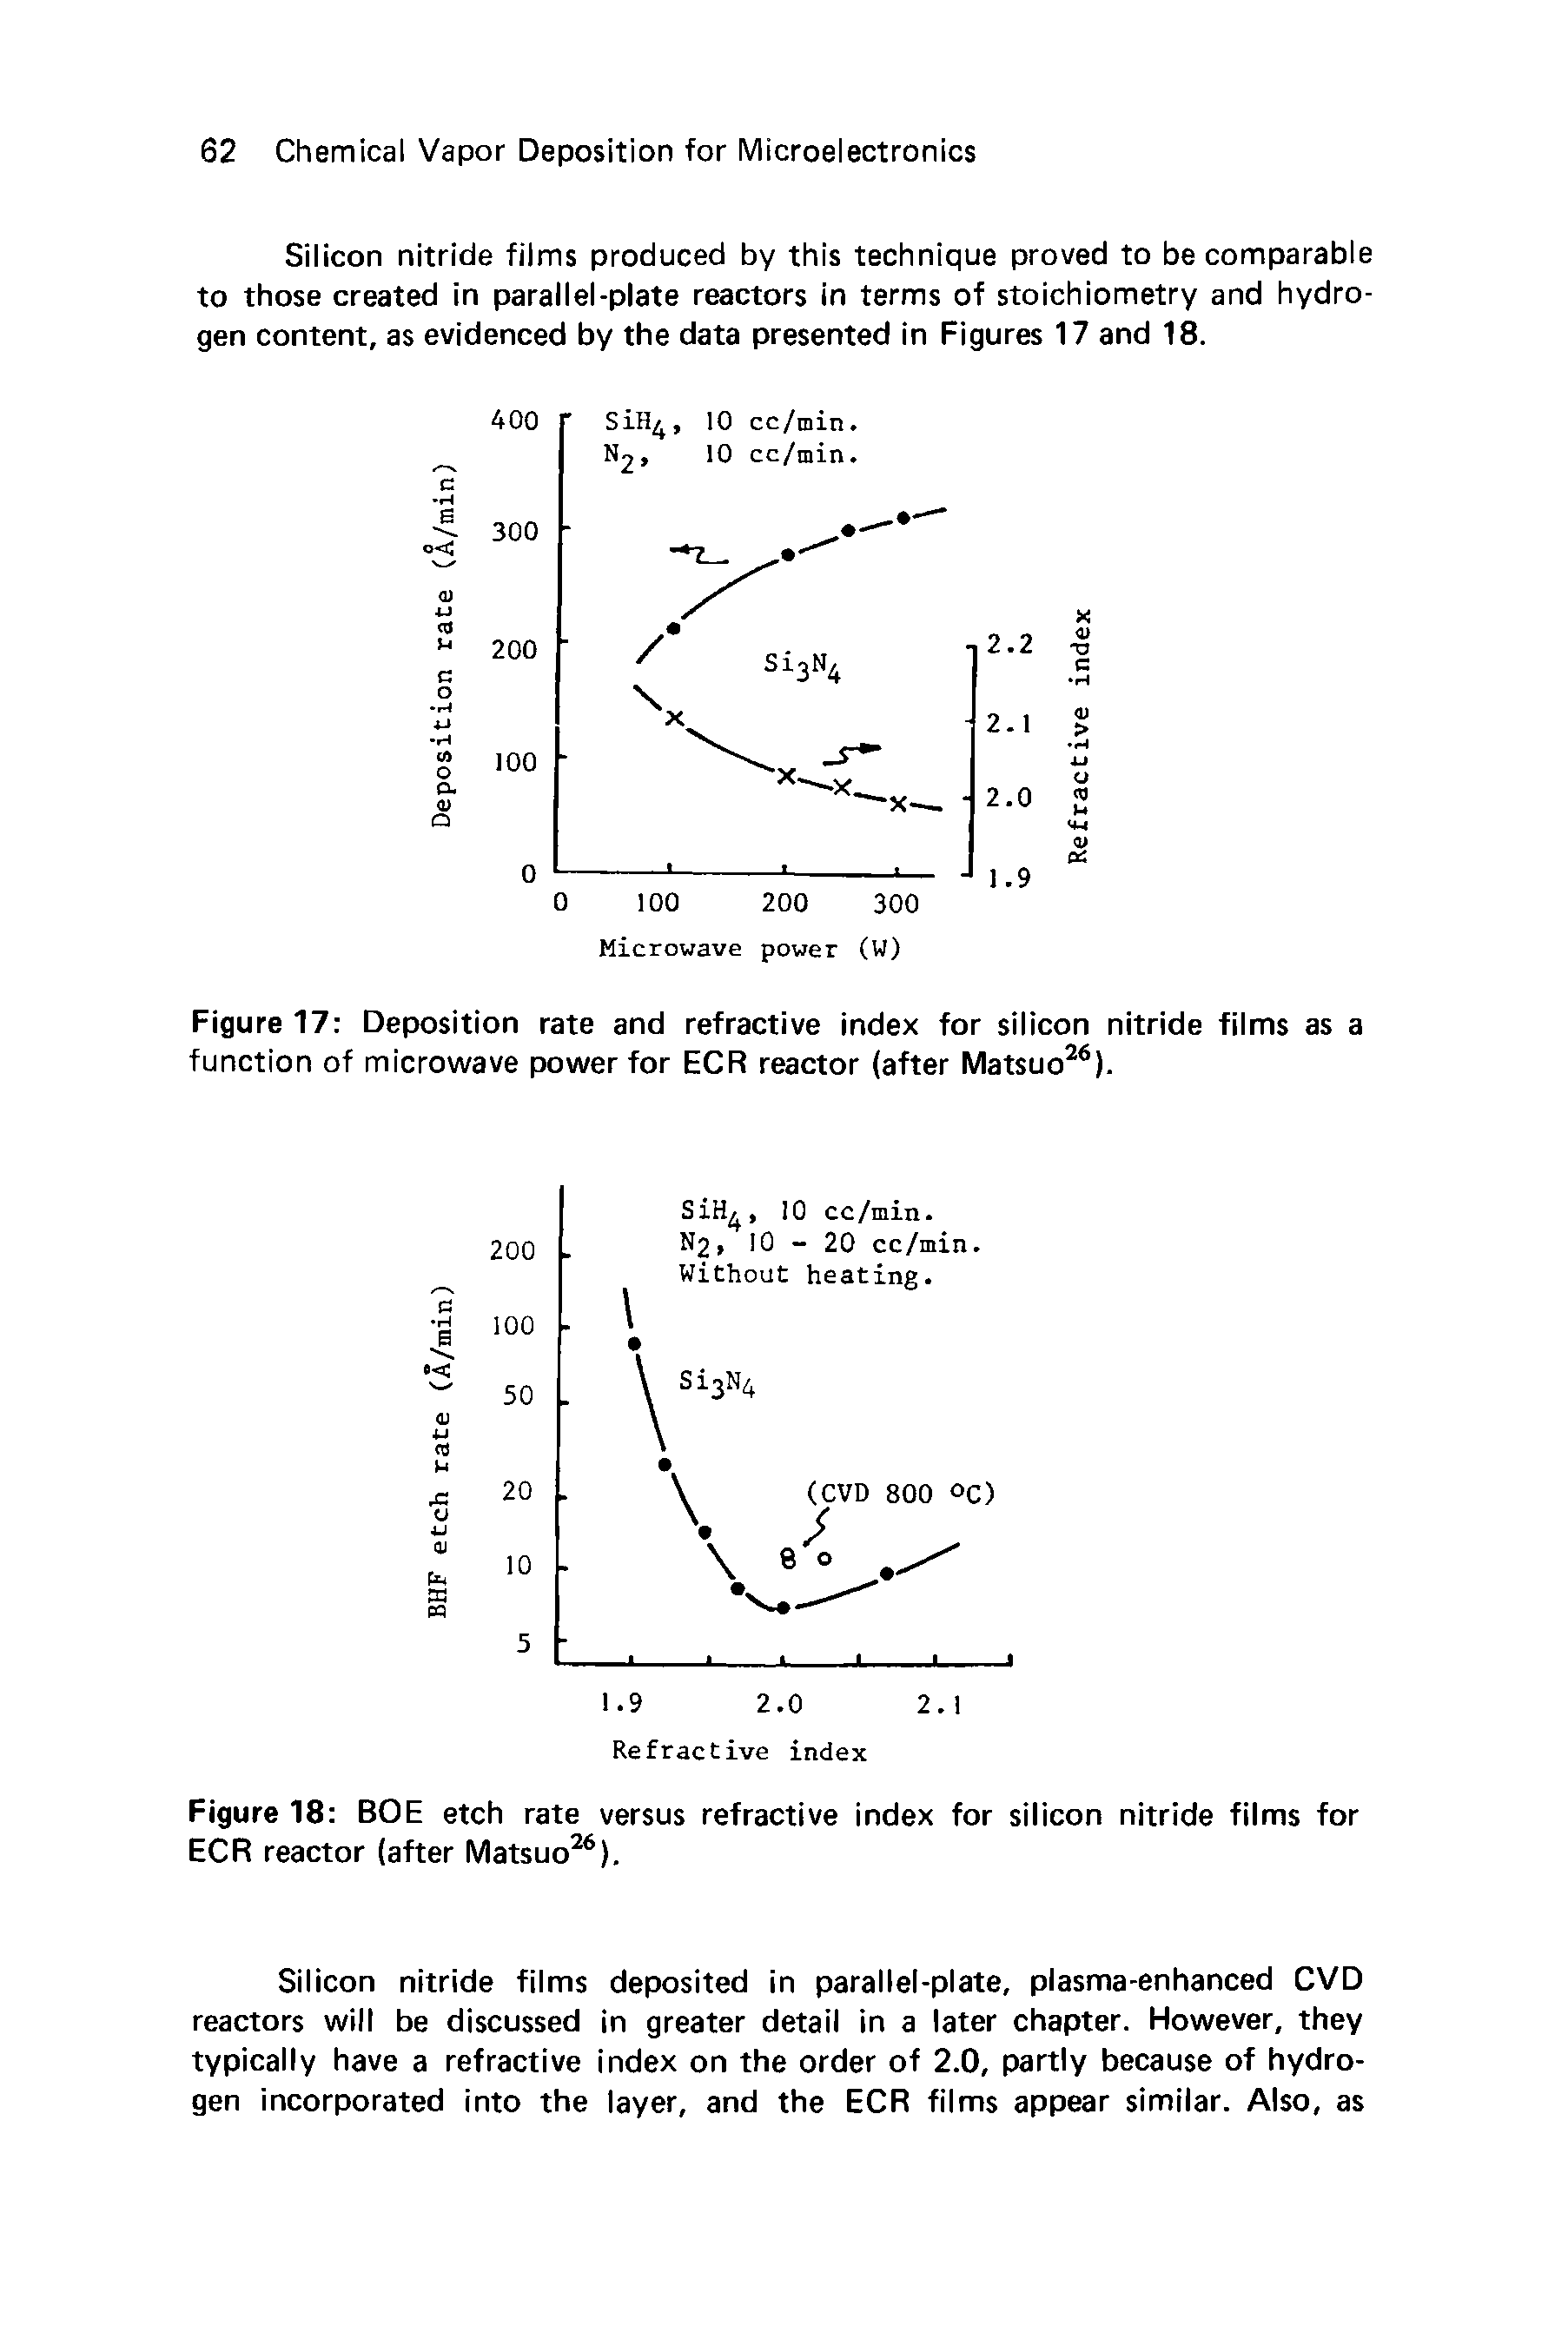 Figure 17 Deposition rate and refractive index for silicon nitride films as a function of microwave power for ECR reactor (after Matsuo26).